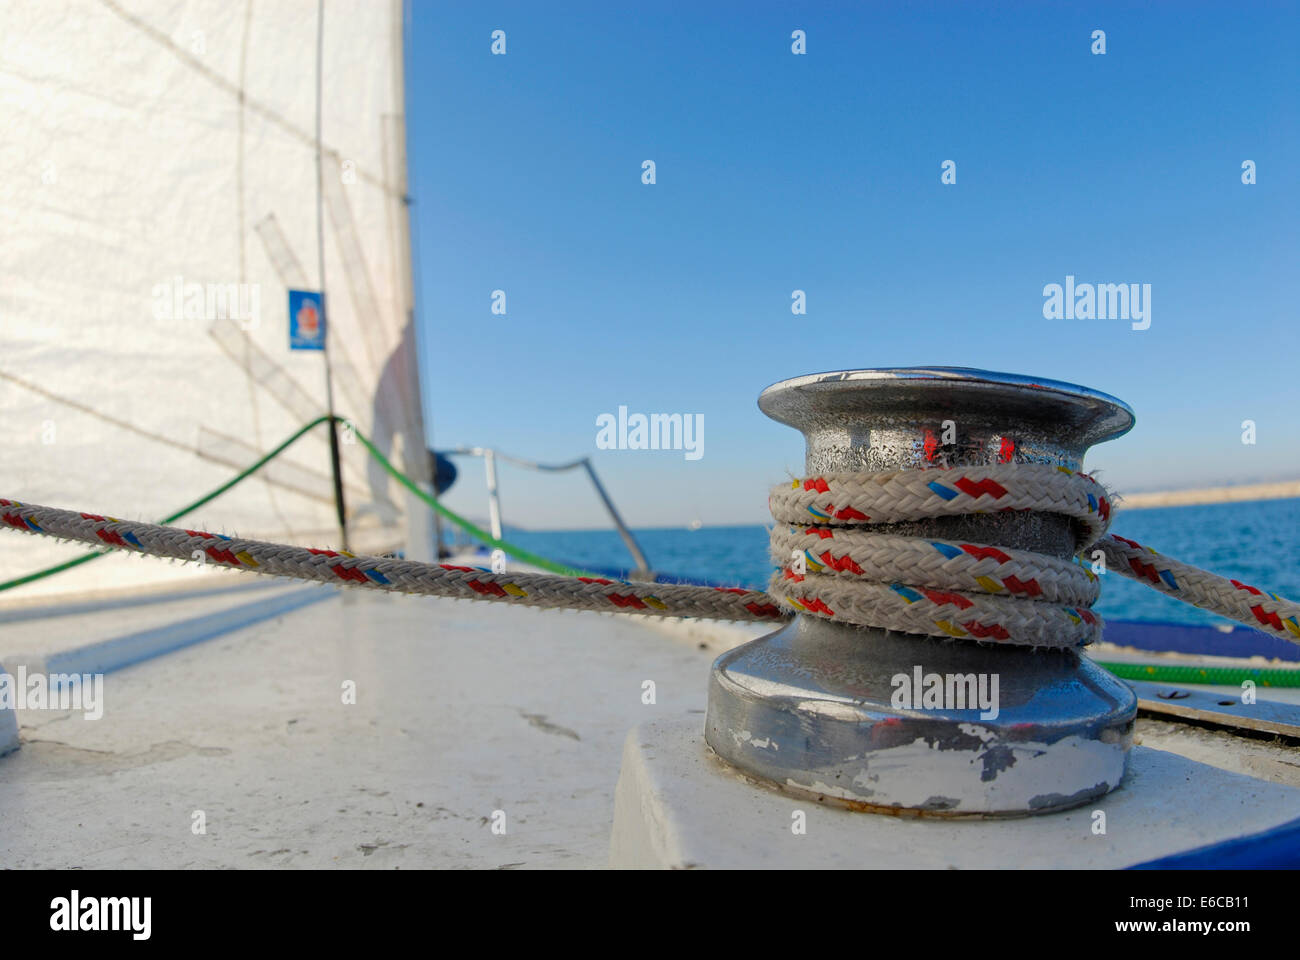 Rope on sail trim (winch) and sails of a yacht in the Mediterranean Sea, France, Europe Stock Photo